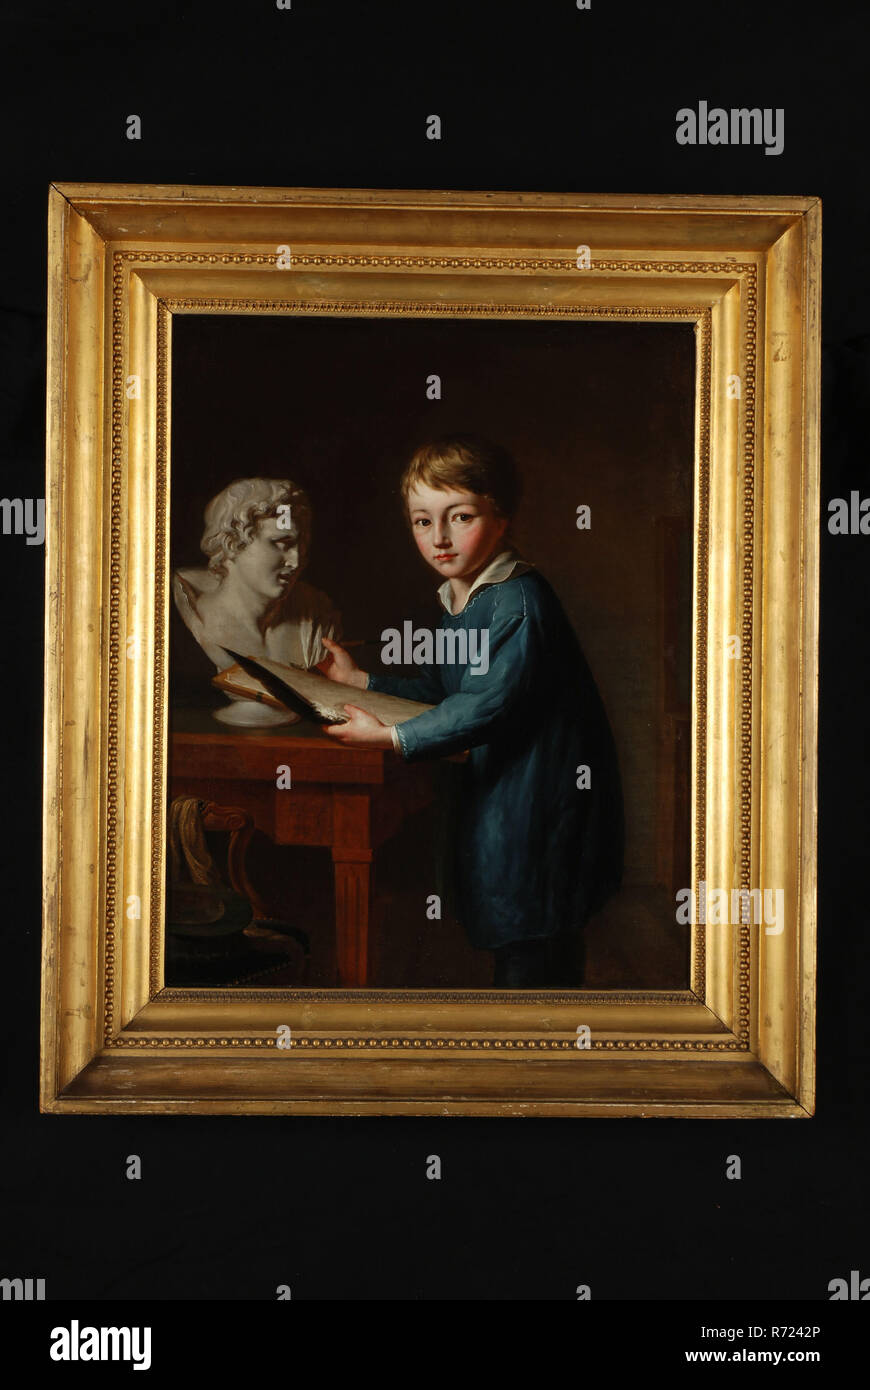 François Montauban van Swijndregt, Portrait of Charles Rochussen at the age of 11, portrait painting material linen oil painting, Portrait portrait of boy representing the painter Charles Rochussen as child (11 years old). With drawing pen (chalk) wiper (feather) and drawing board dressed in kind of painter's jacket and standing at table on which man's bust; in the foreground on the left in front of the table chair with scarf and fancy hat . In original gilded baklijst Painting of signature and year on edge: F.M.v.S. inV: & Fft 1825 children's portrait knee painting drawing drawing instruction Stock Photo